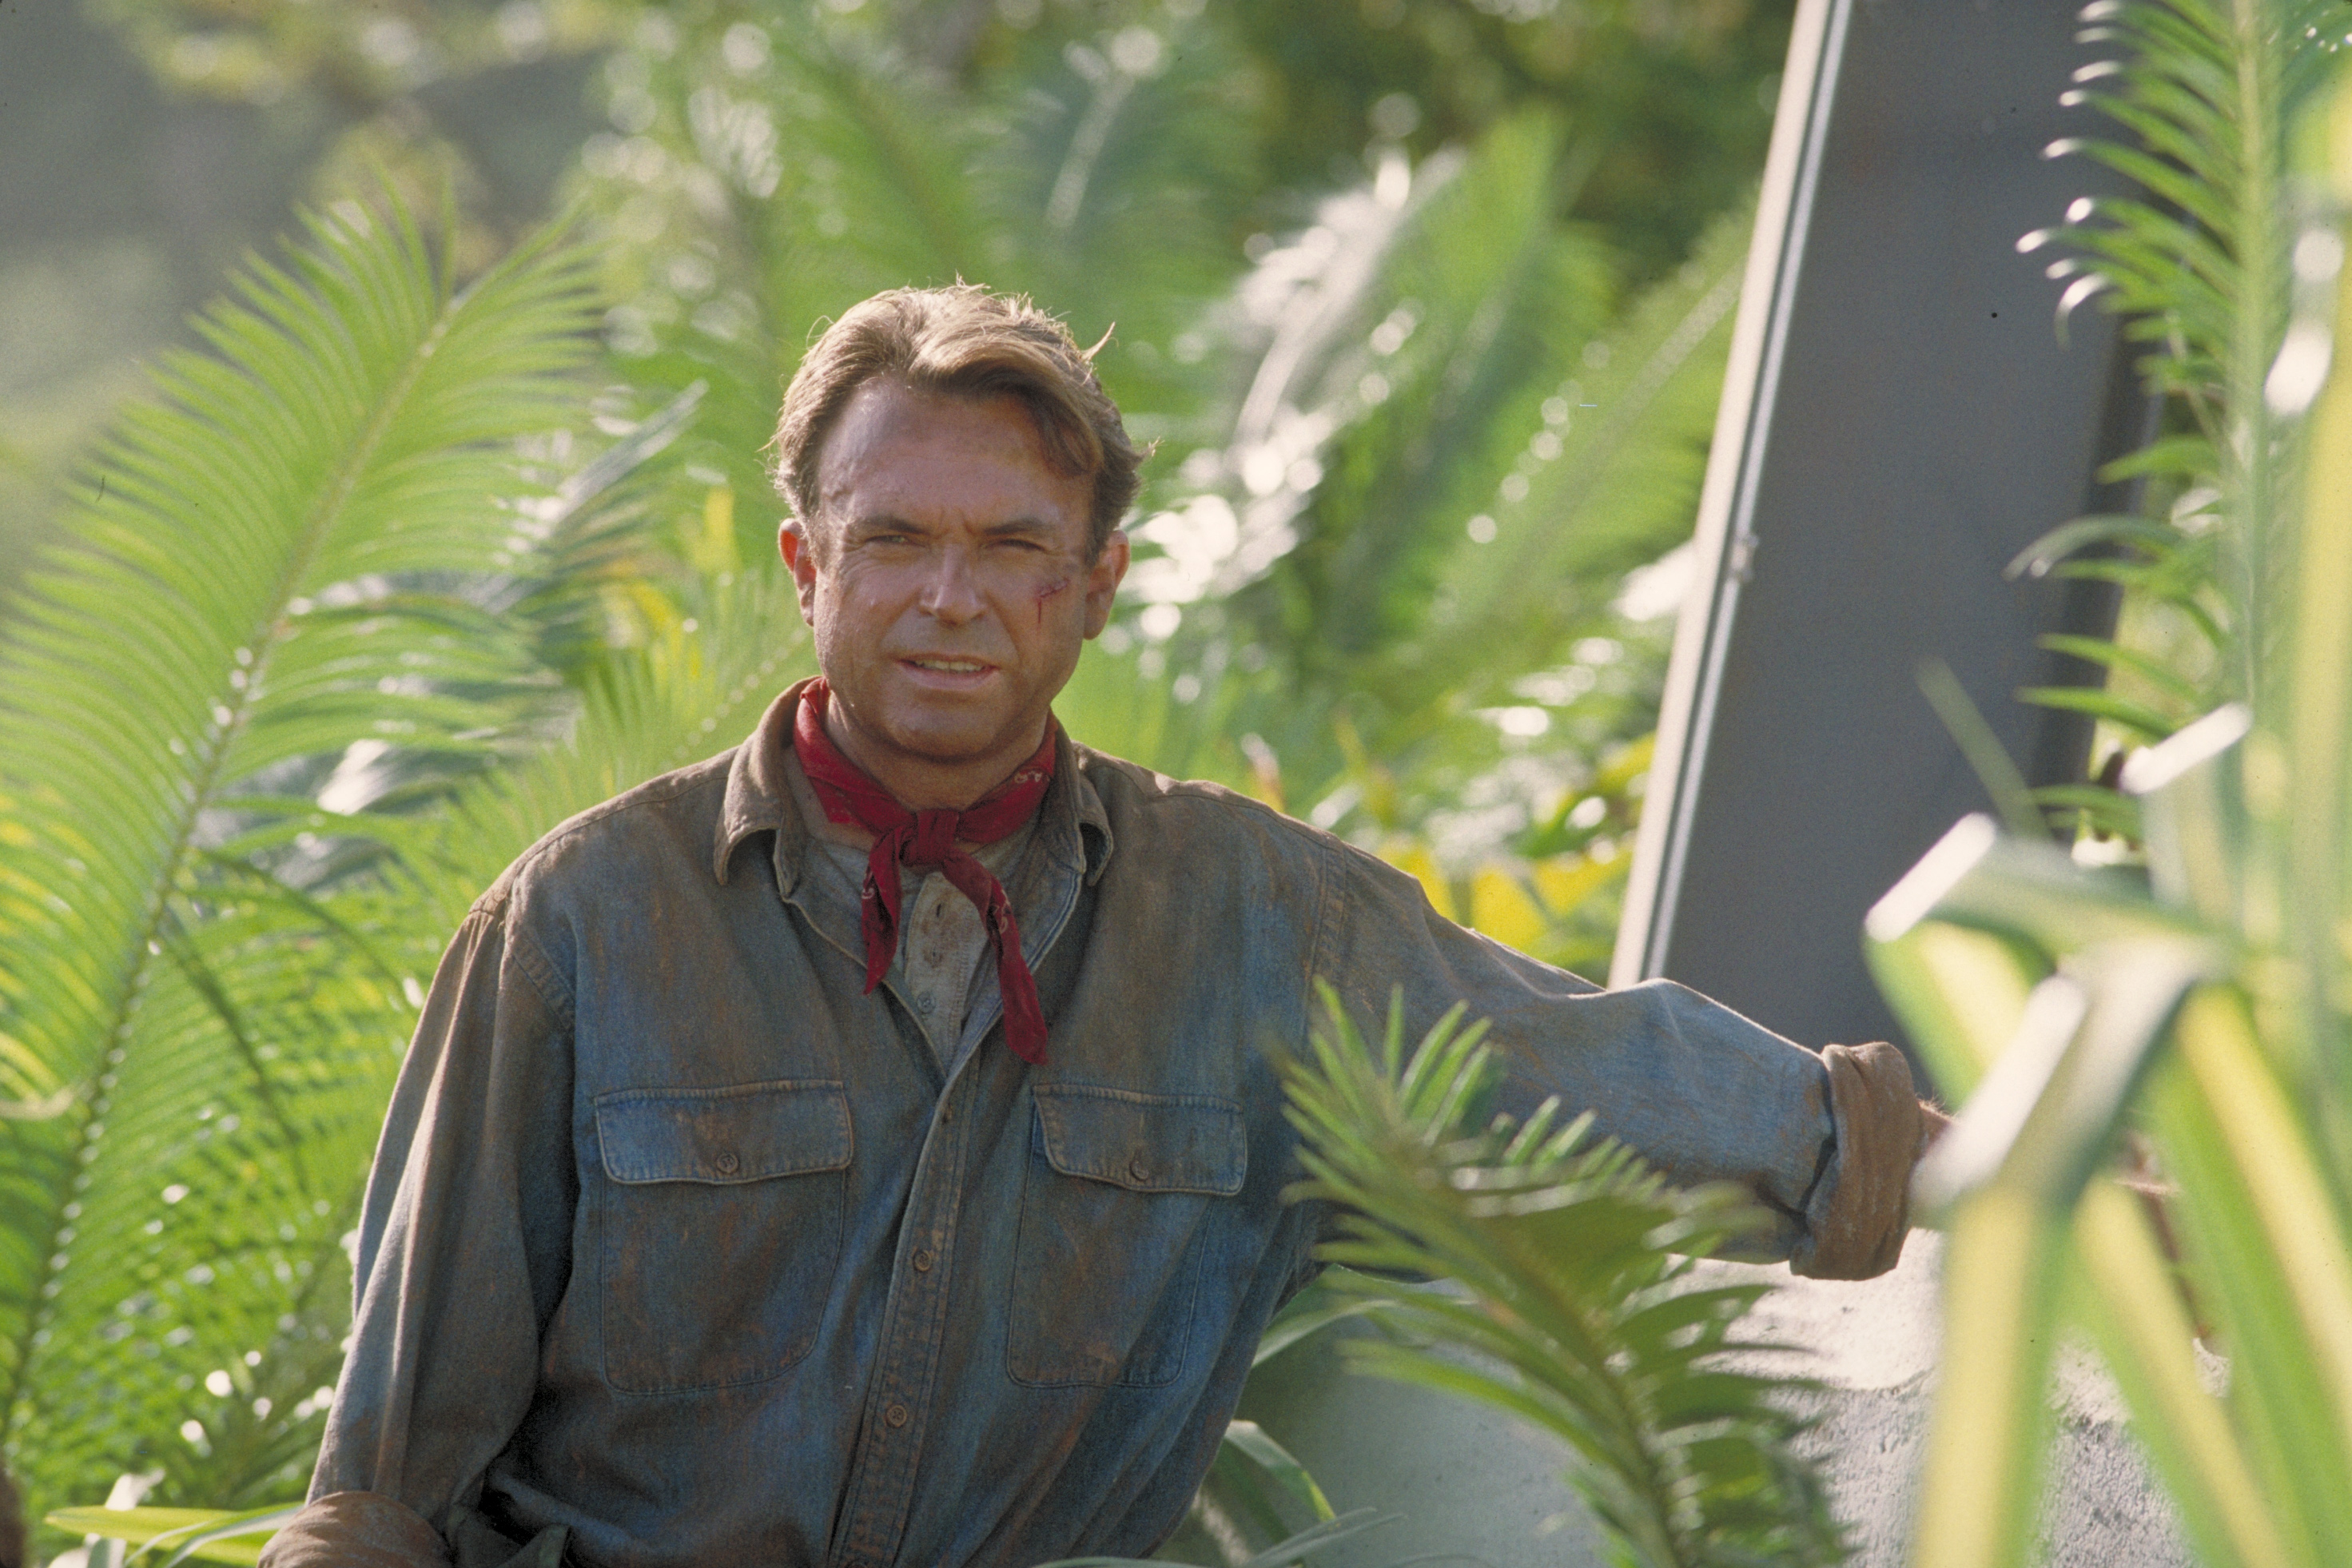 Actor Sam Neill as Dr. Alan Grant,  in a scene from the film 'Jurassic Park', 1993. | Source: Getty Images